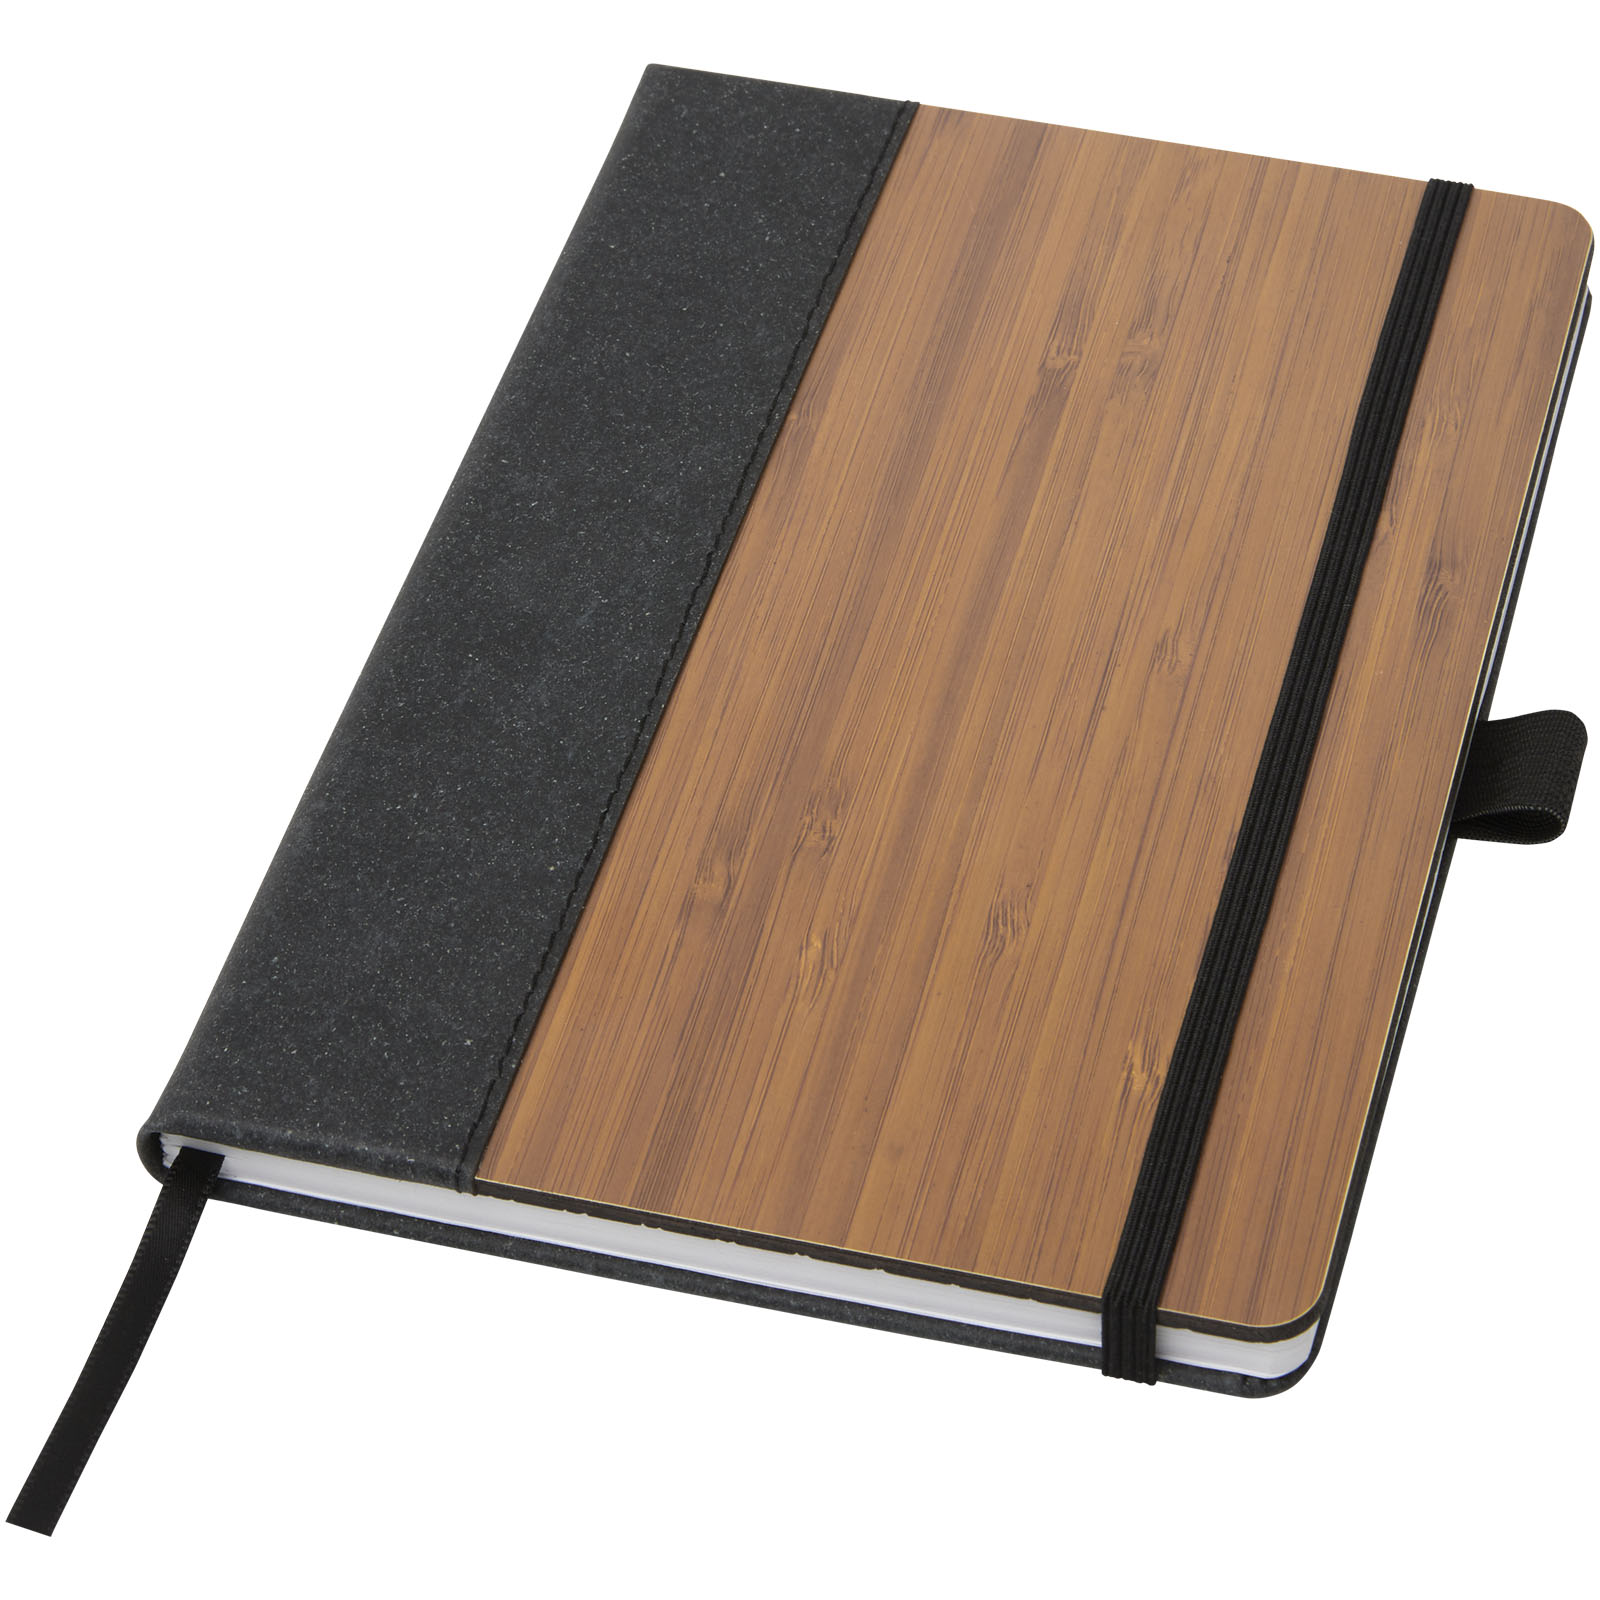 Advertising Hard cover notebooks - Note A5 bamboo notebook